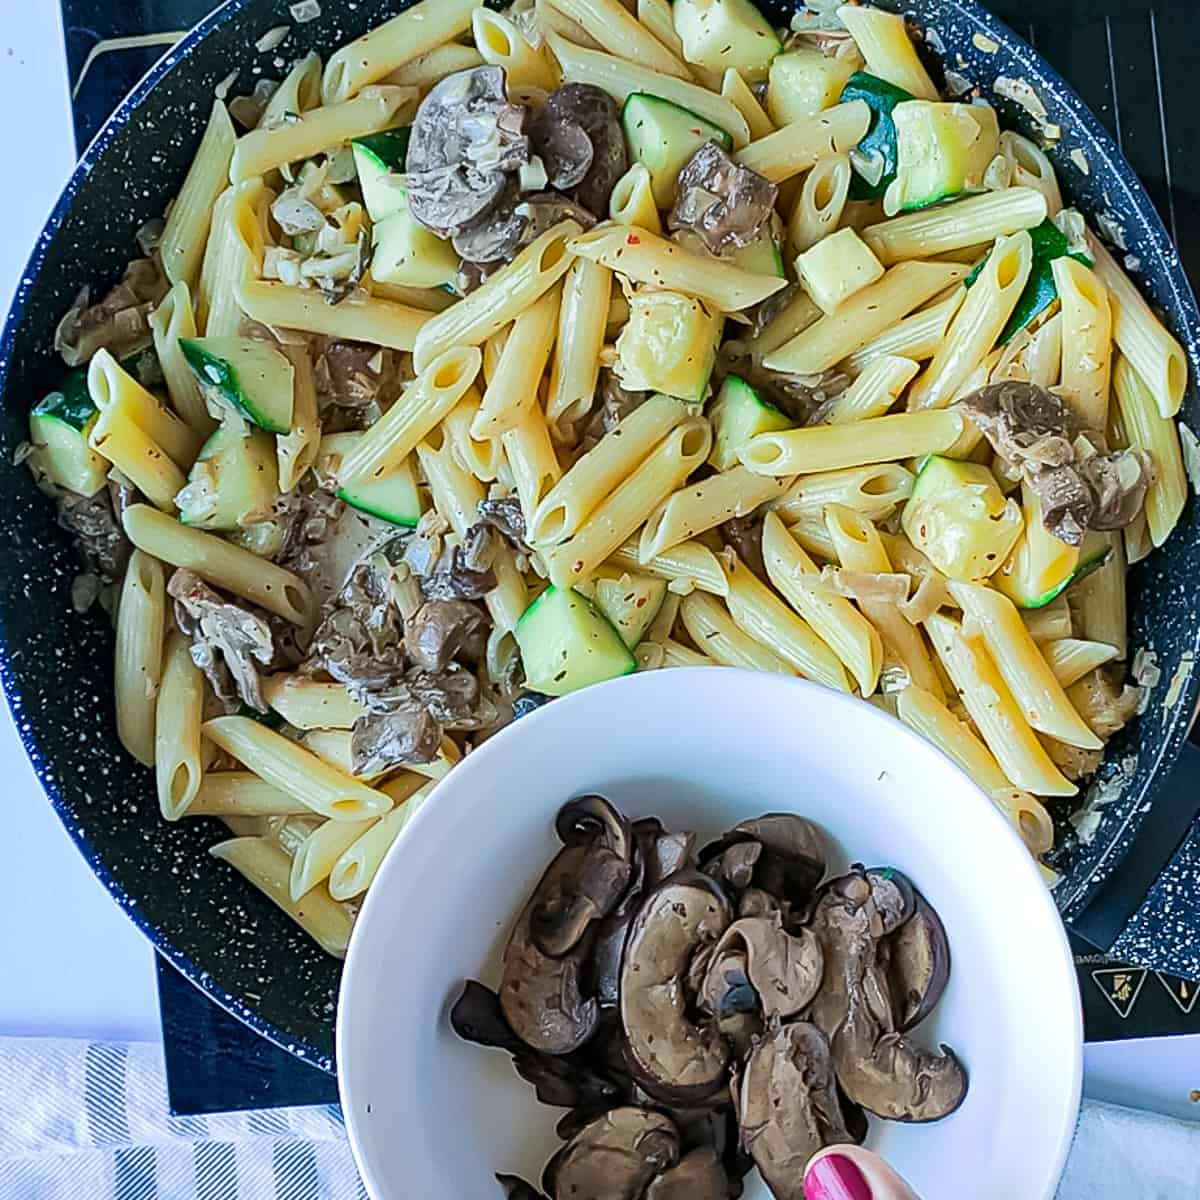 Sauteed mushrooms being added to mushroom and zucchini pasta in a pan.